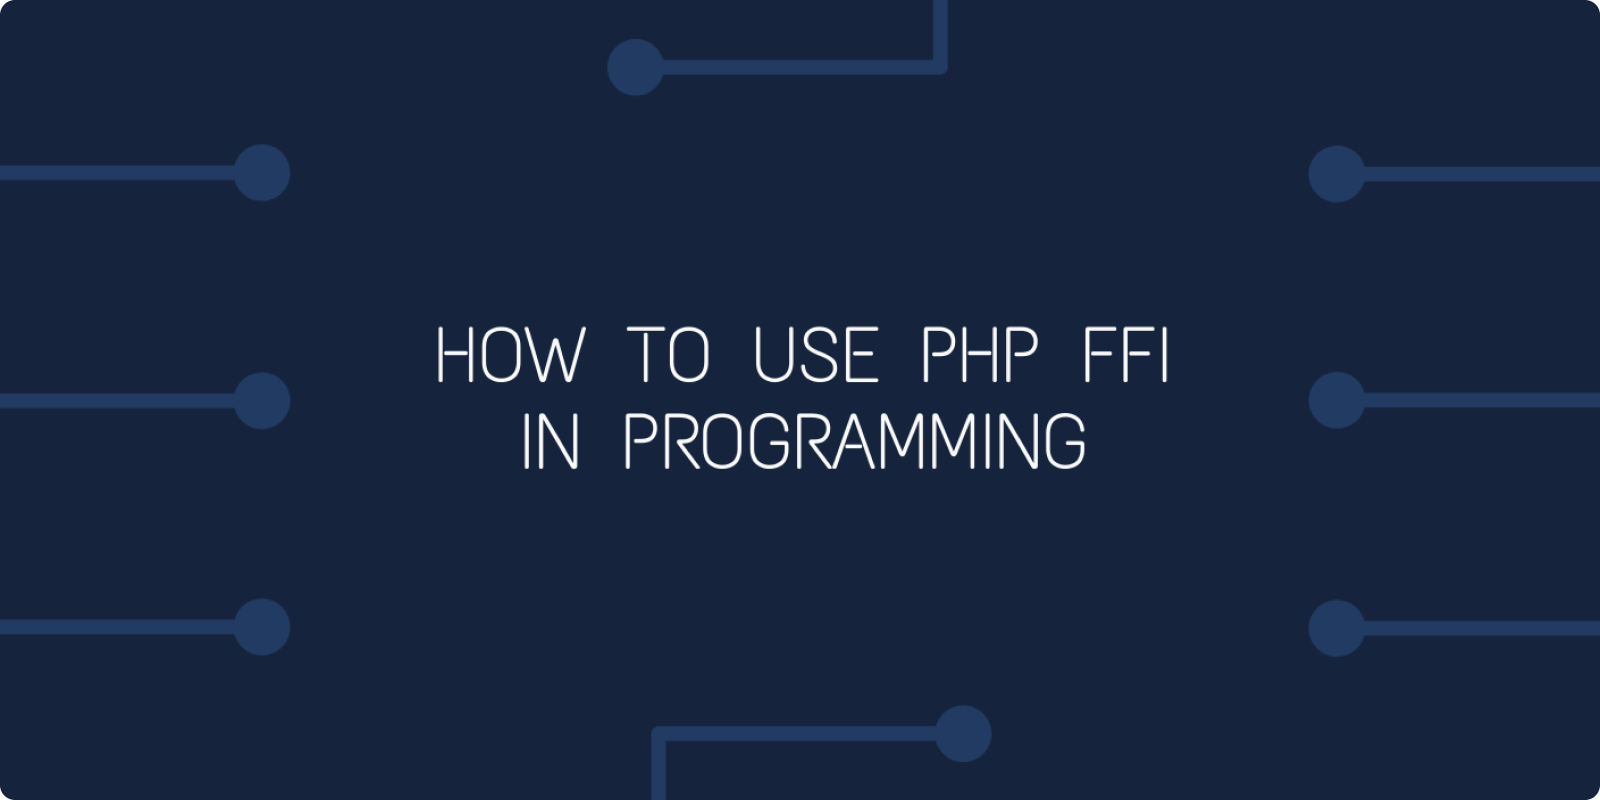 How to Use PHP FFI in Programming